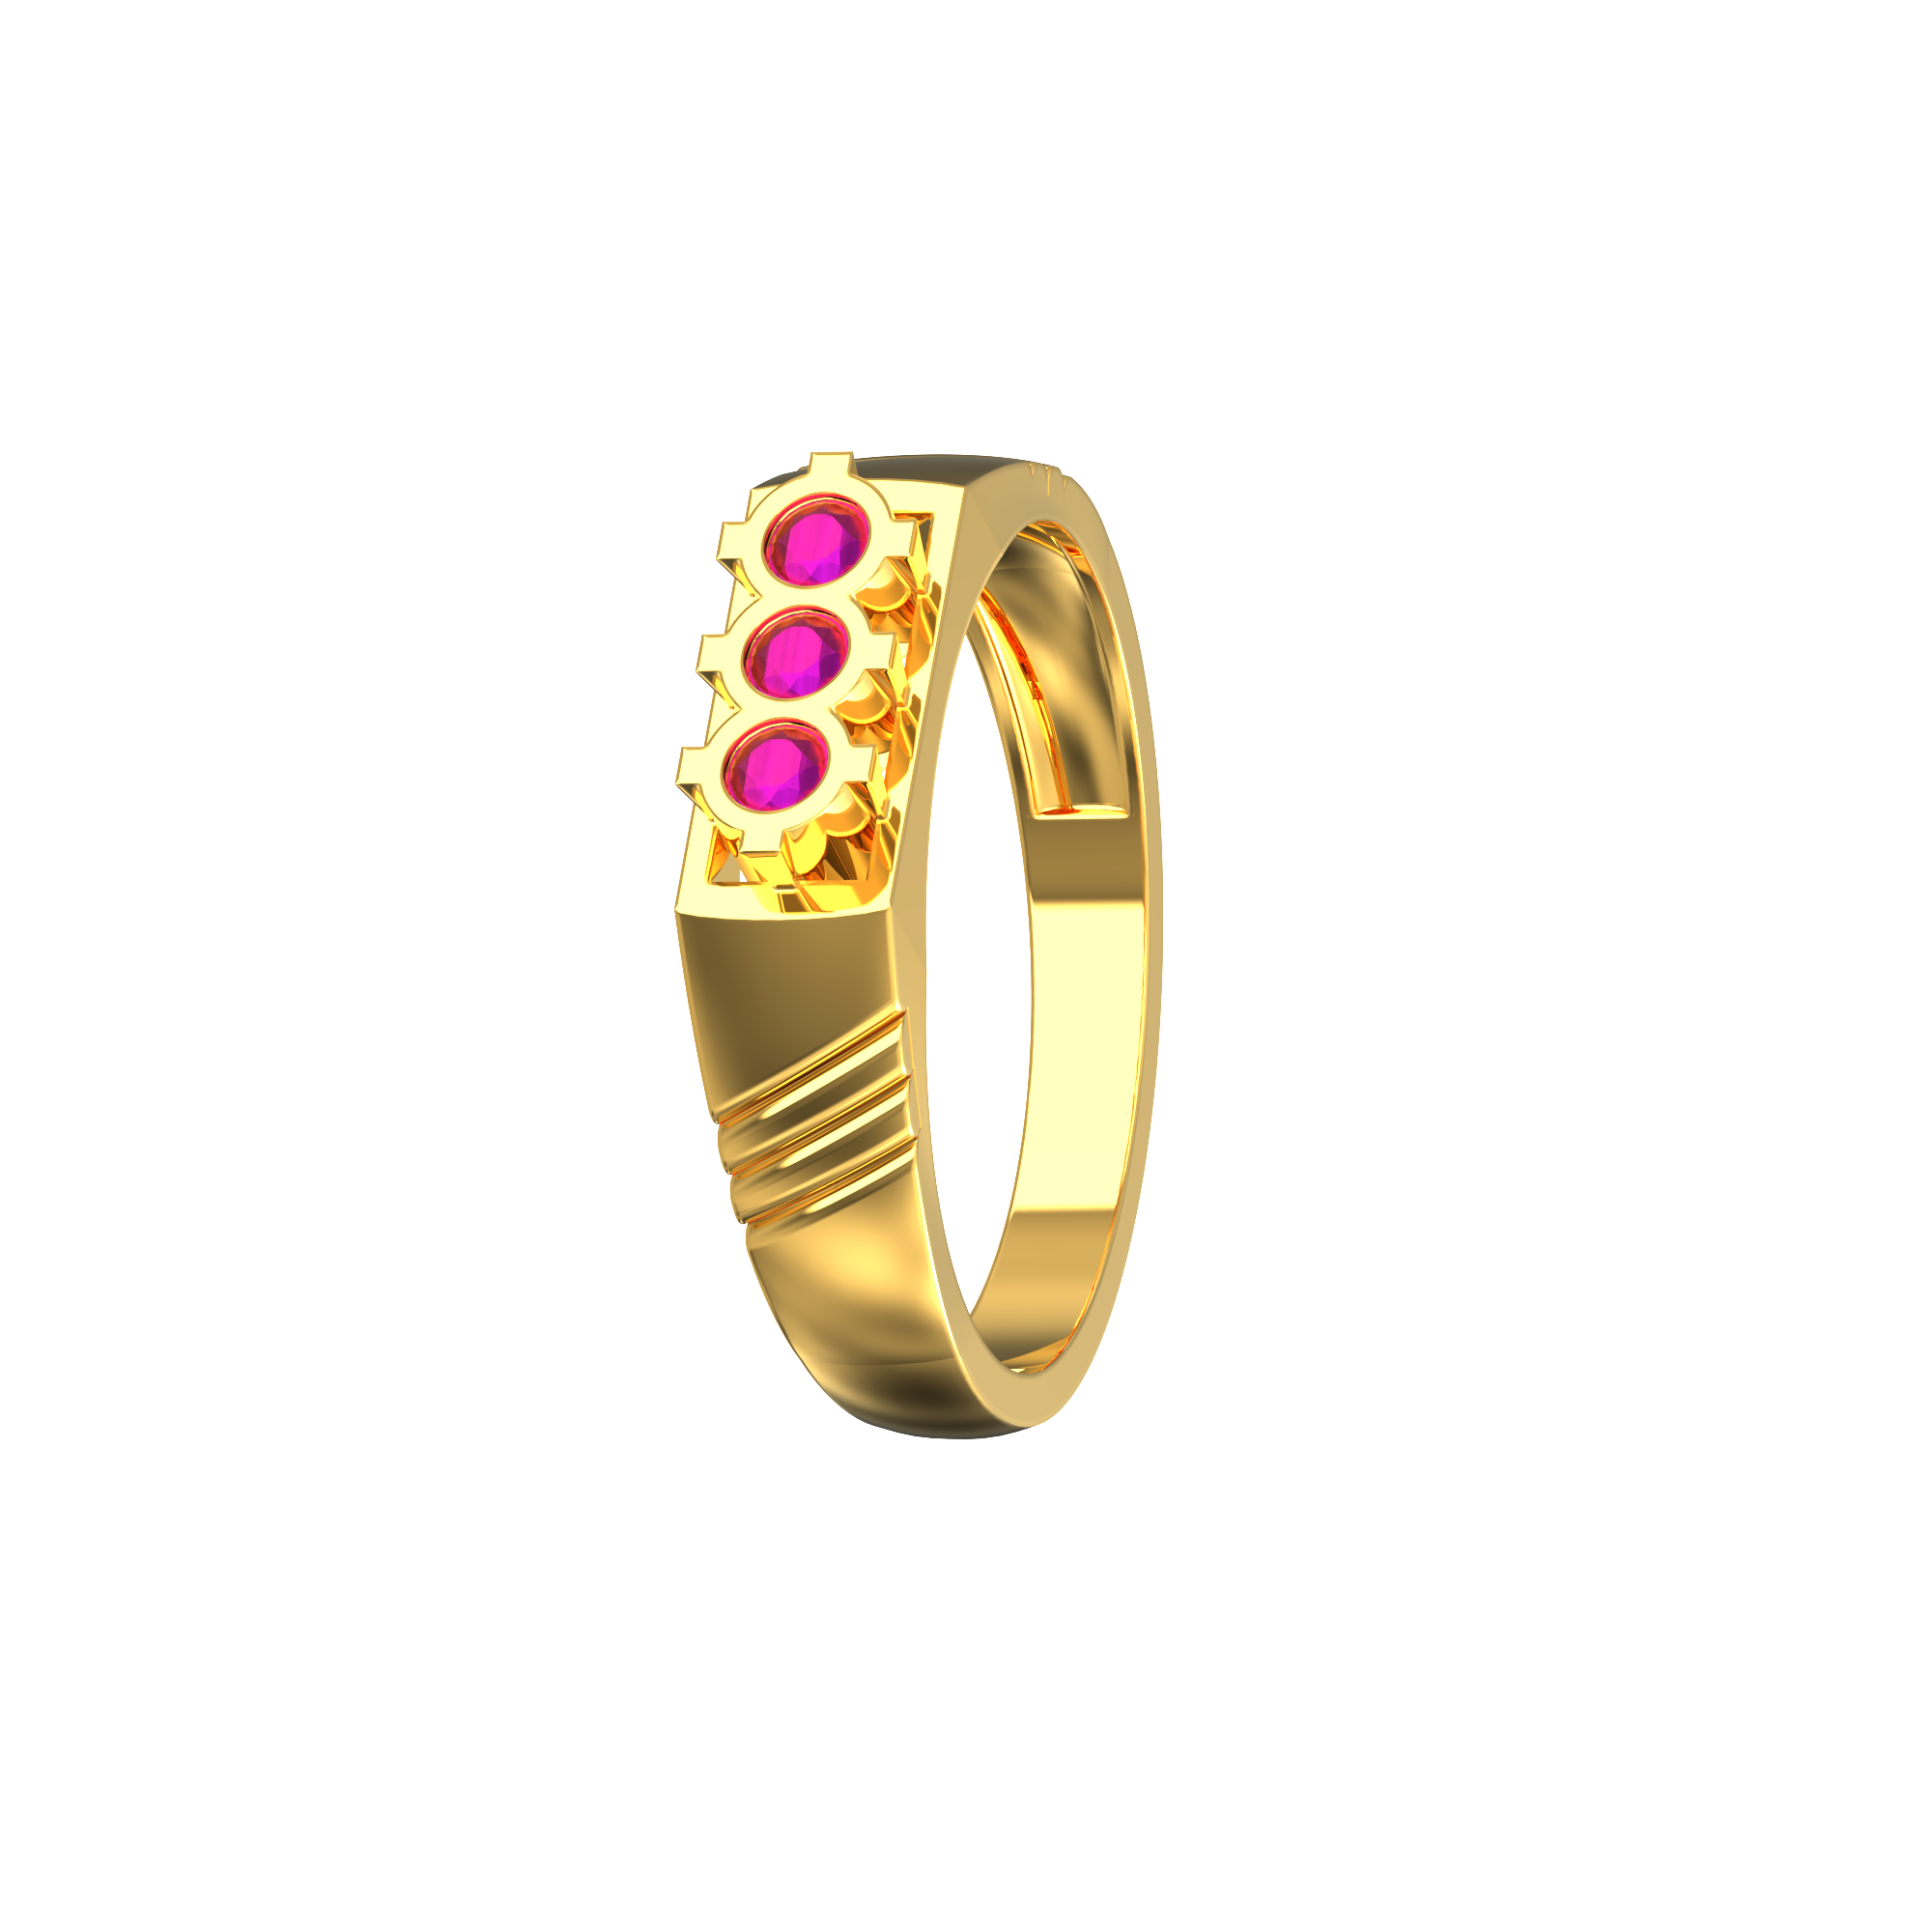 Ganesh Ji Ring 5gm | Gold rings fashion, Fashion jewelry necklaces gold,  New gold jewellery designs